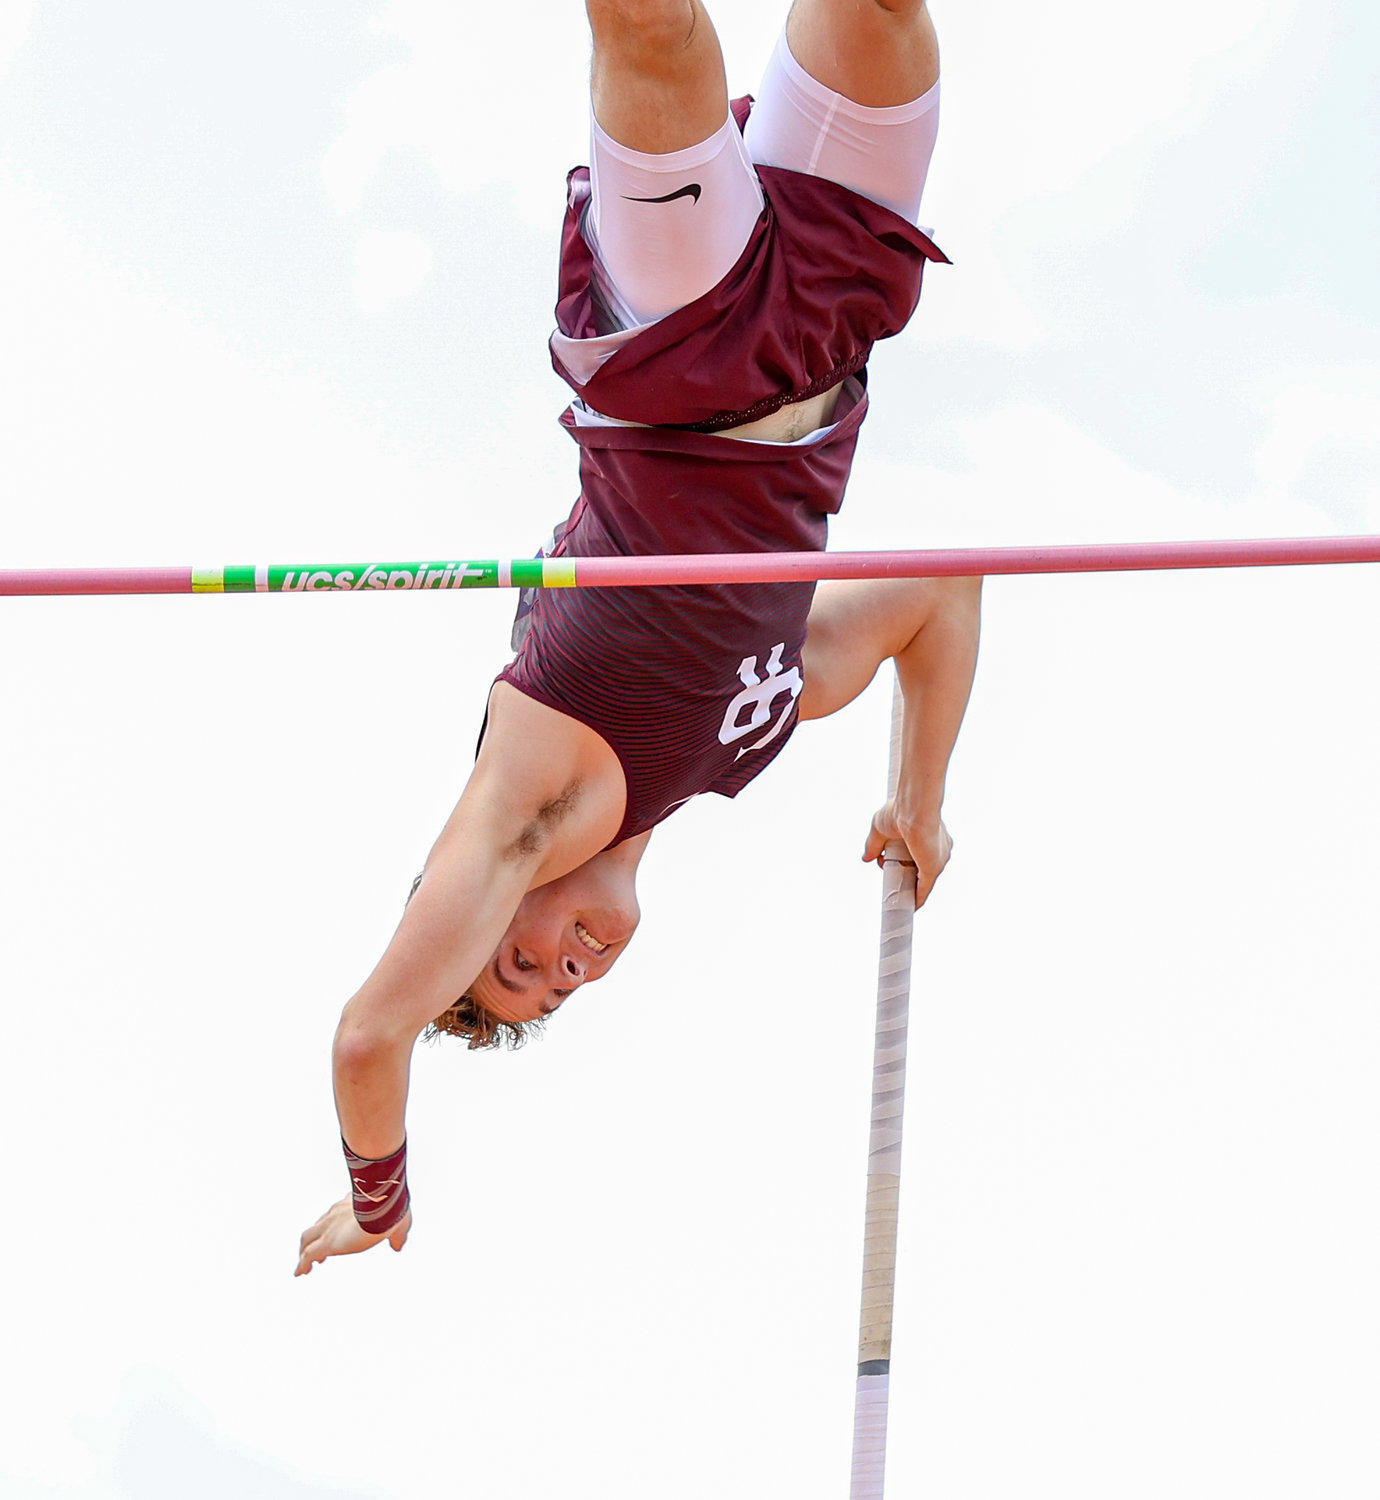 William Saxman of Cinco Ranch High School competes in the Class 6A boys pole vault event at the UIL State Track and Field Meet on May 7, 2021 at Mike A. Myers Stadium in Austin, Texas. Saxman finished fourth in the event with a vault of 15-6.00.